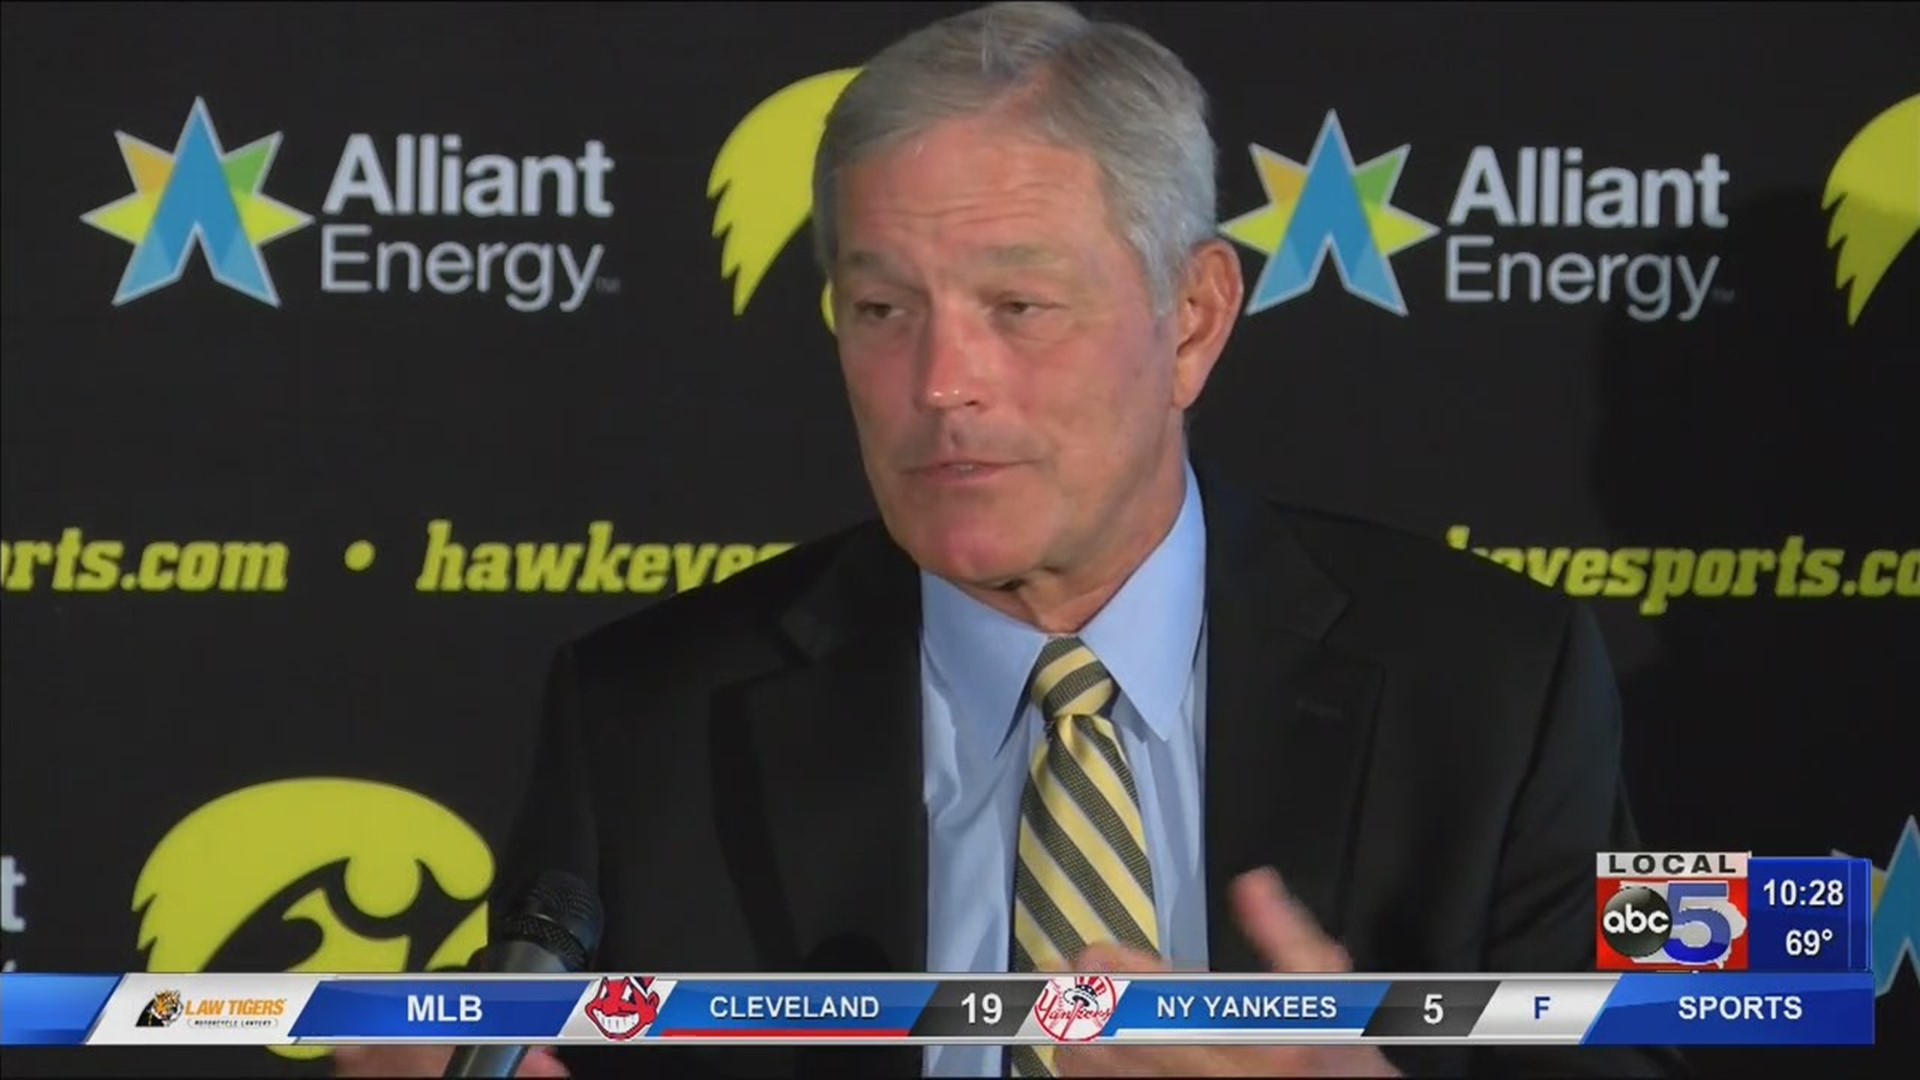 Sports betting goes live in Iowa, How does Kirk Ferentz feel about the new law?